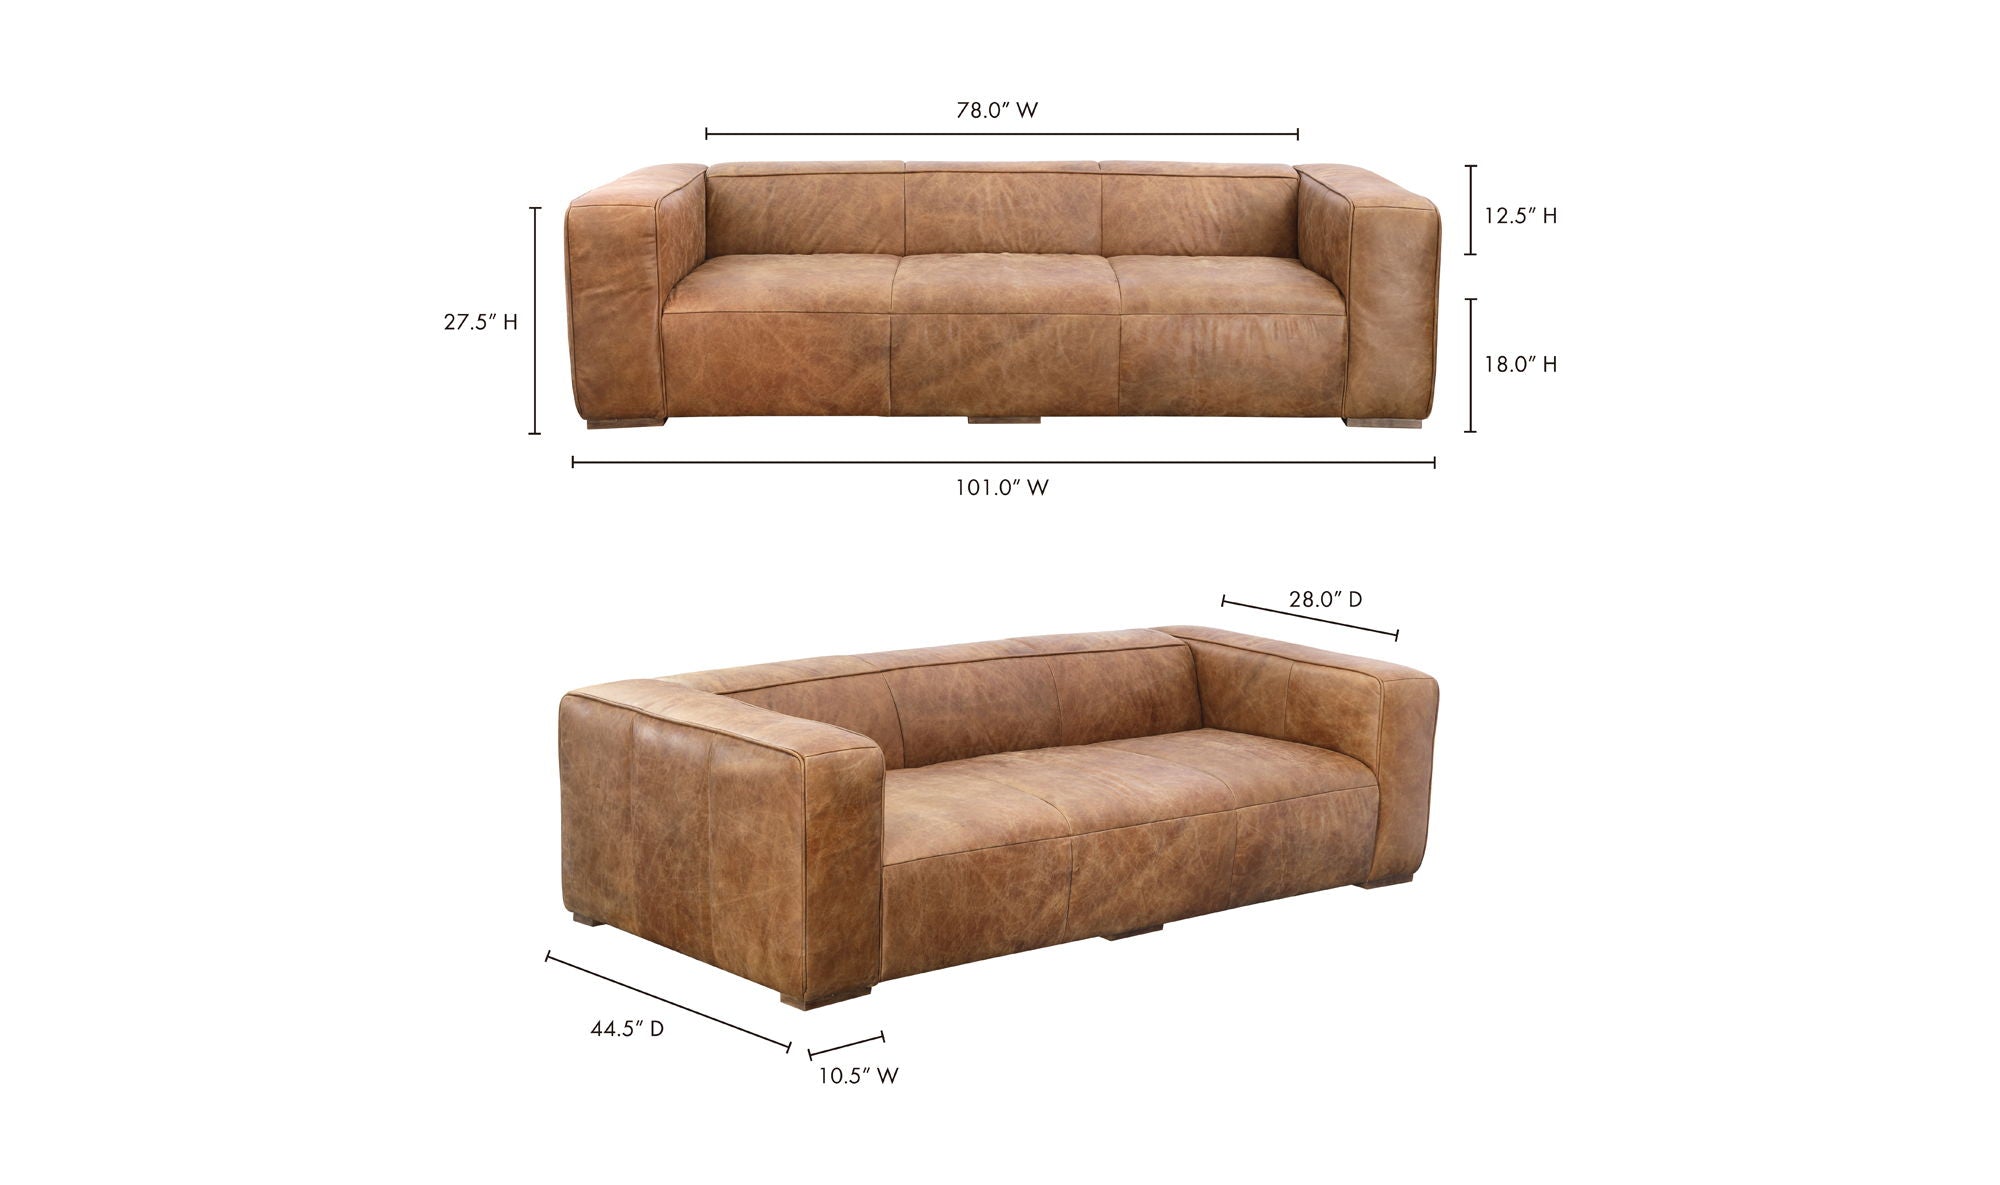 Bolton Sofa - Cappuccino Brown Top-Grain Leather - Comfortable and Stylish Living Room Furniture